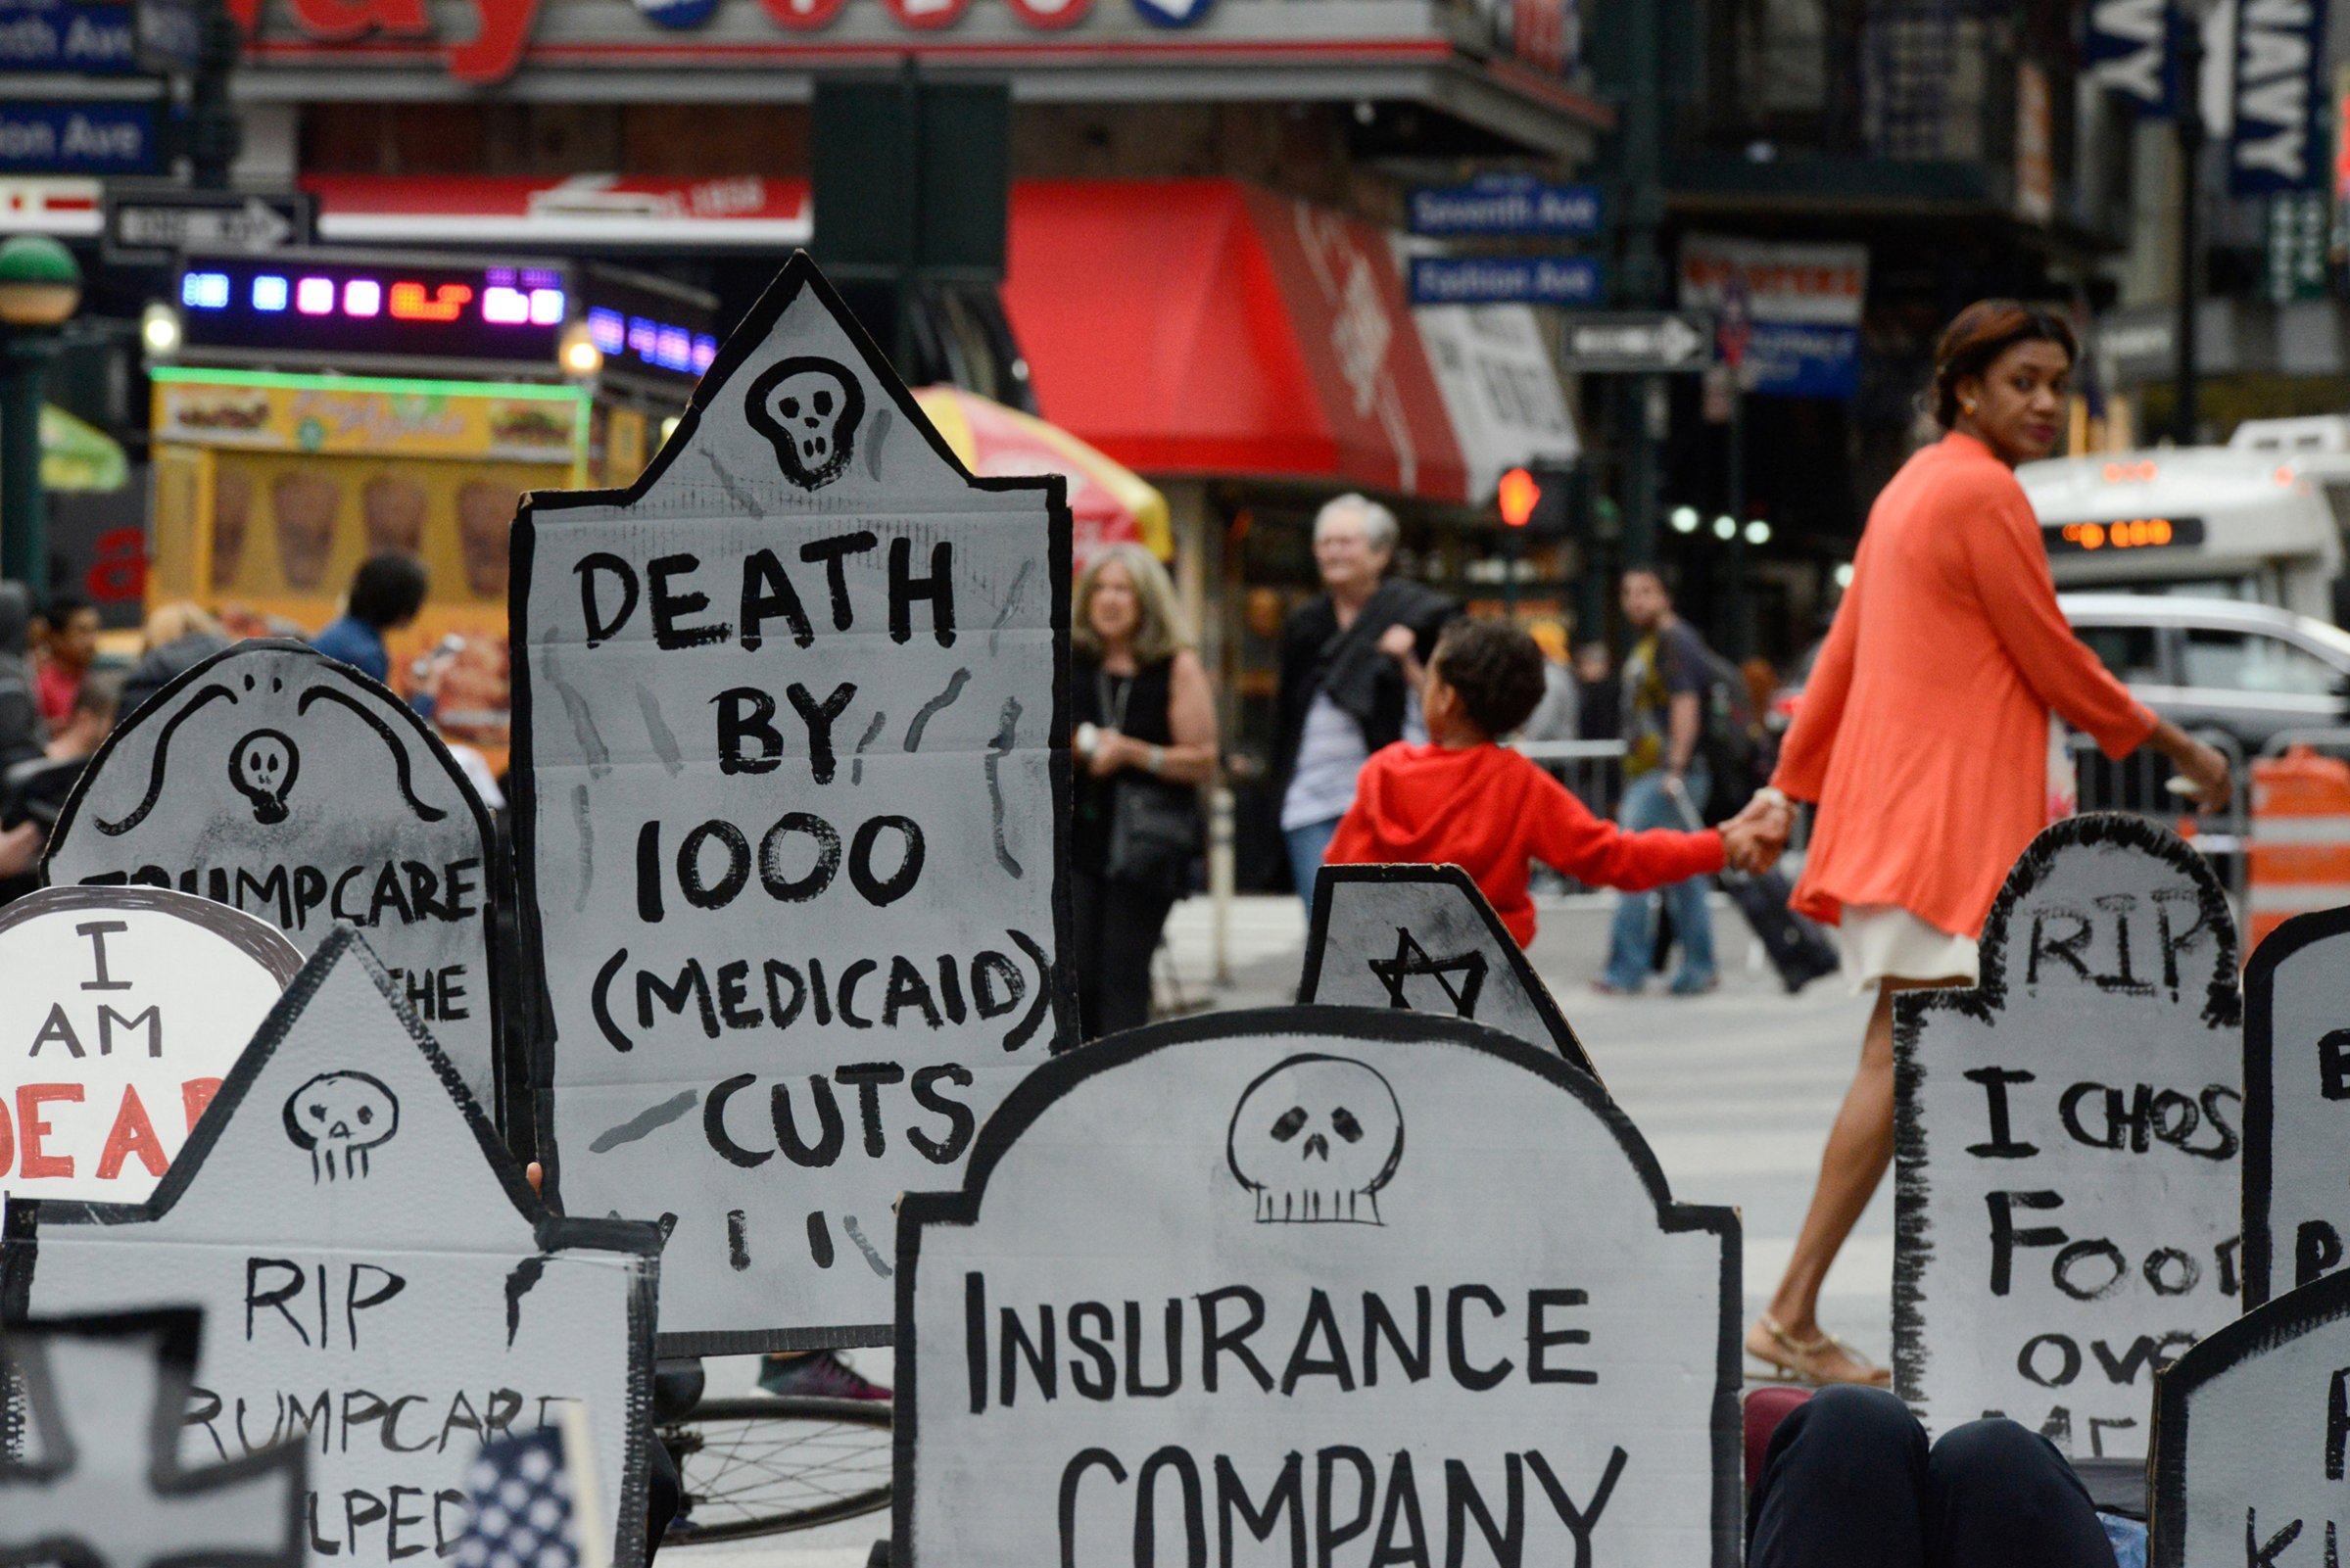 A protest of the Republican health care effort on June 4 in New York City.